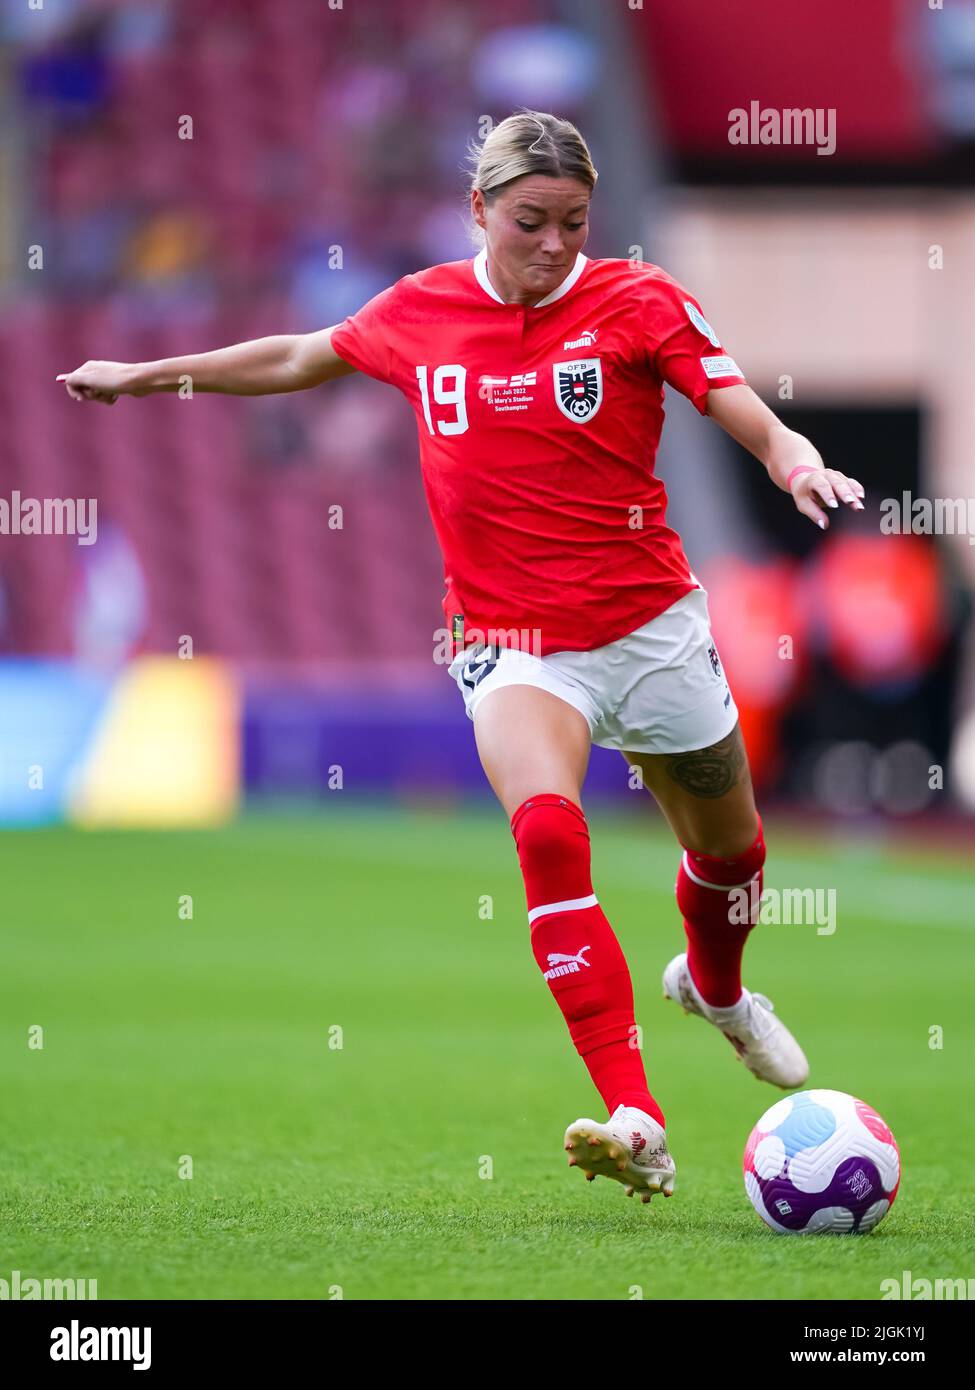 Southampton, UK. 11th July, 2022. Southampton, England, July 11th 2022: Verena Hanshaw (19 Austria) shoots the ball during the UEFA Womens Euro 2022 group A football match between Austria and Northern Ireland at St. Marys Stadium in Southampton, England. (Daniela Porcelli /SPP) Credit: SPP Sport Press Photo. /Alamy Live News Stock Photo